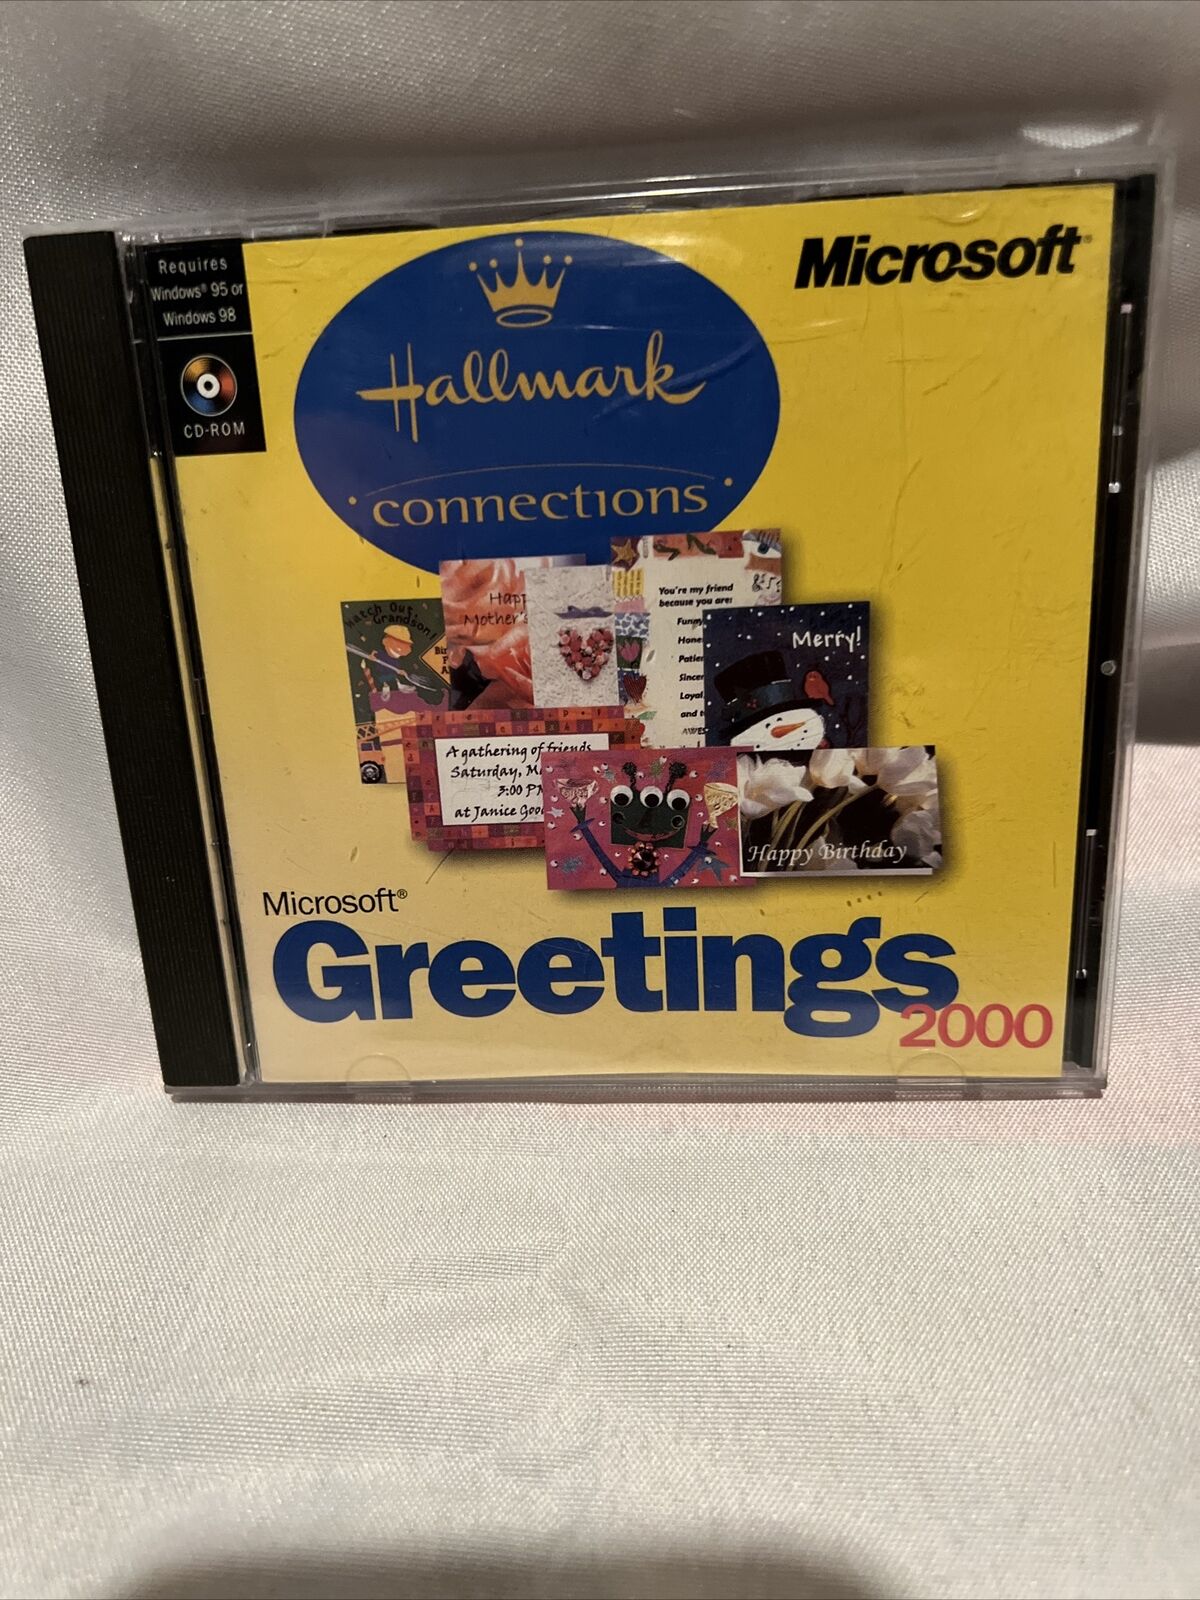 Microsoft Greetings 2000 Hallmark Connections CD ROM Old Software DIY Cards